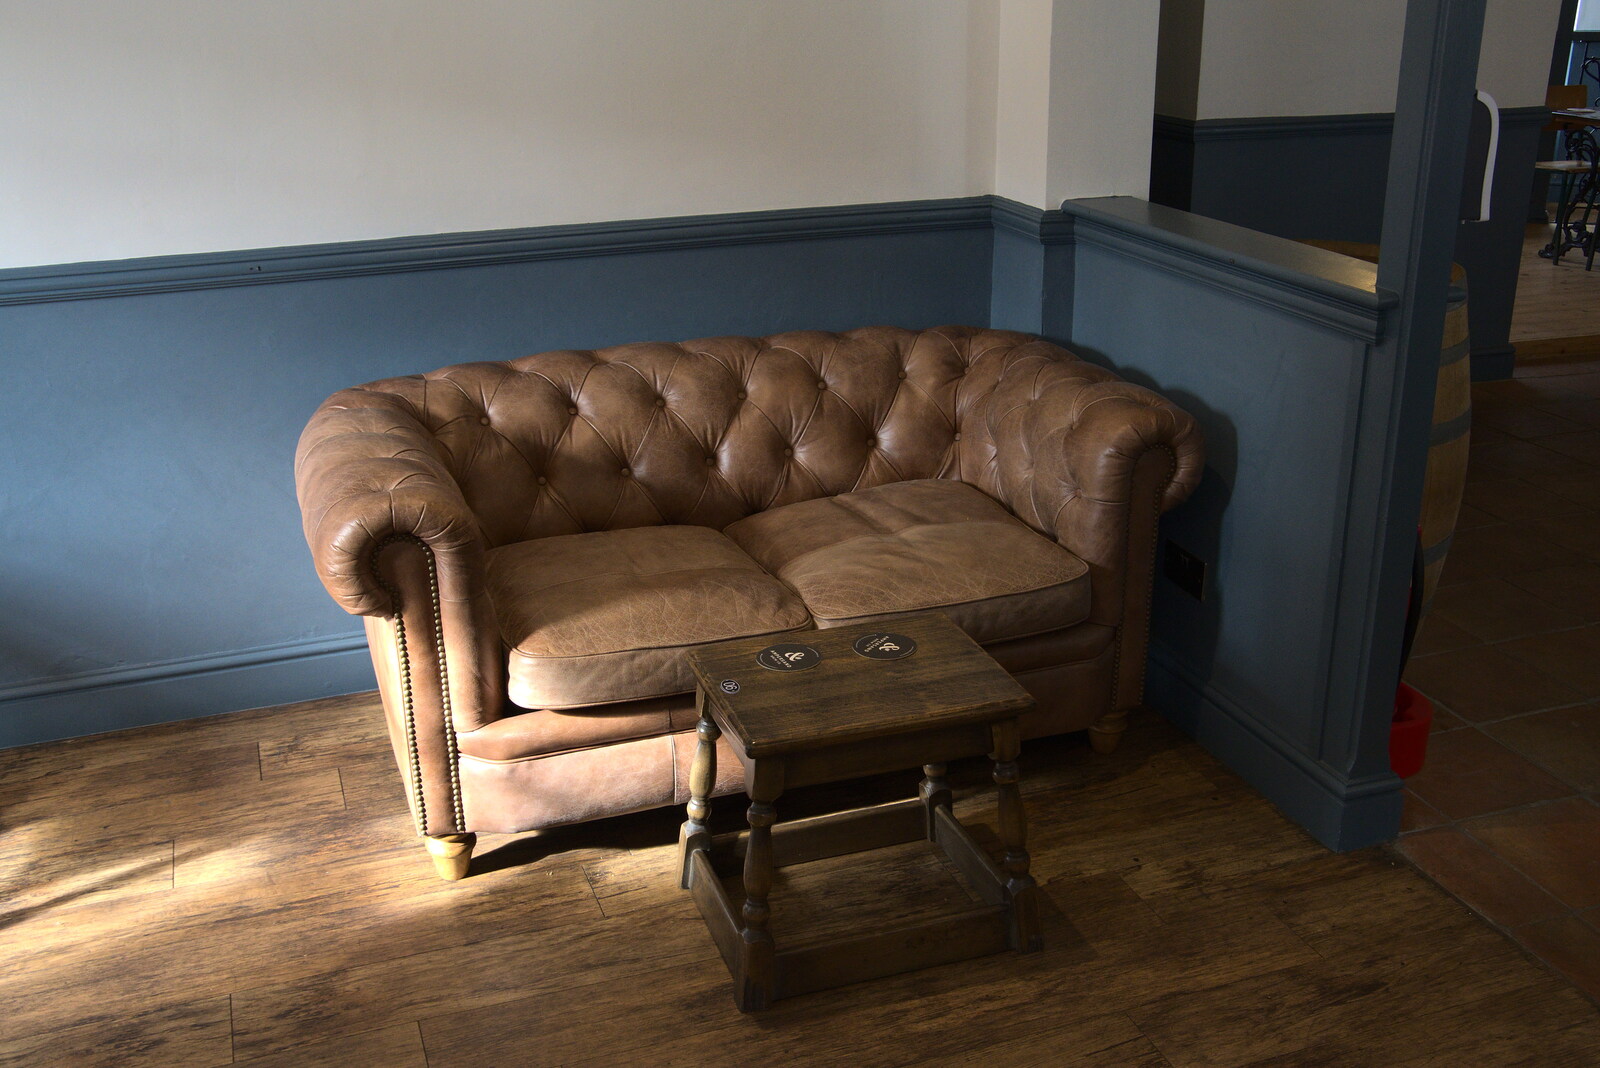 A nice leather Chesterfield sofa in the pub from A Trip to Weybread Sailing Club, Harleston, Norfolk - 17th October 2021